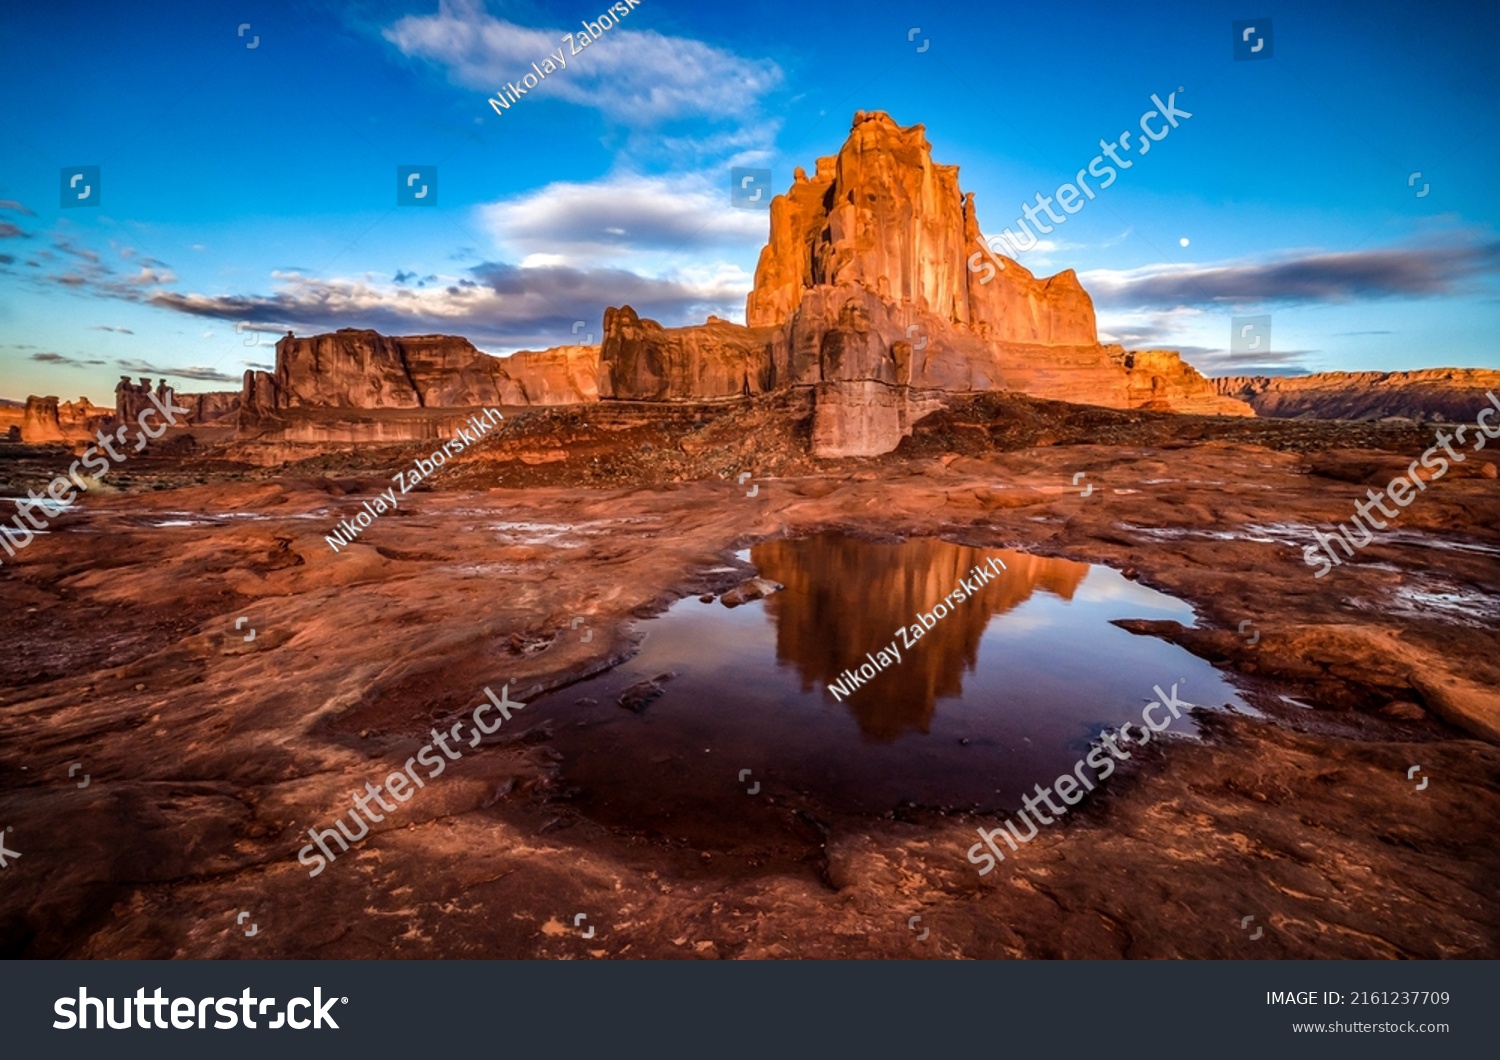 Red rock in the canyon. Beautiful red rock canyon landscape. Rock in red canyon landscape. Red rock reflection in water in canyon #2161237709